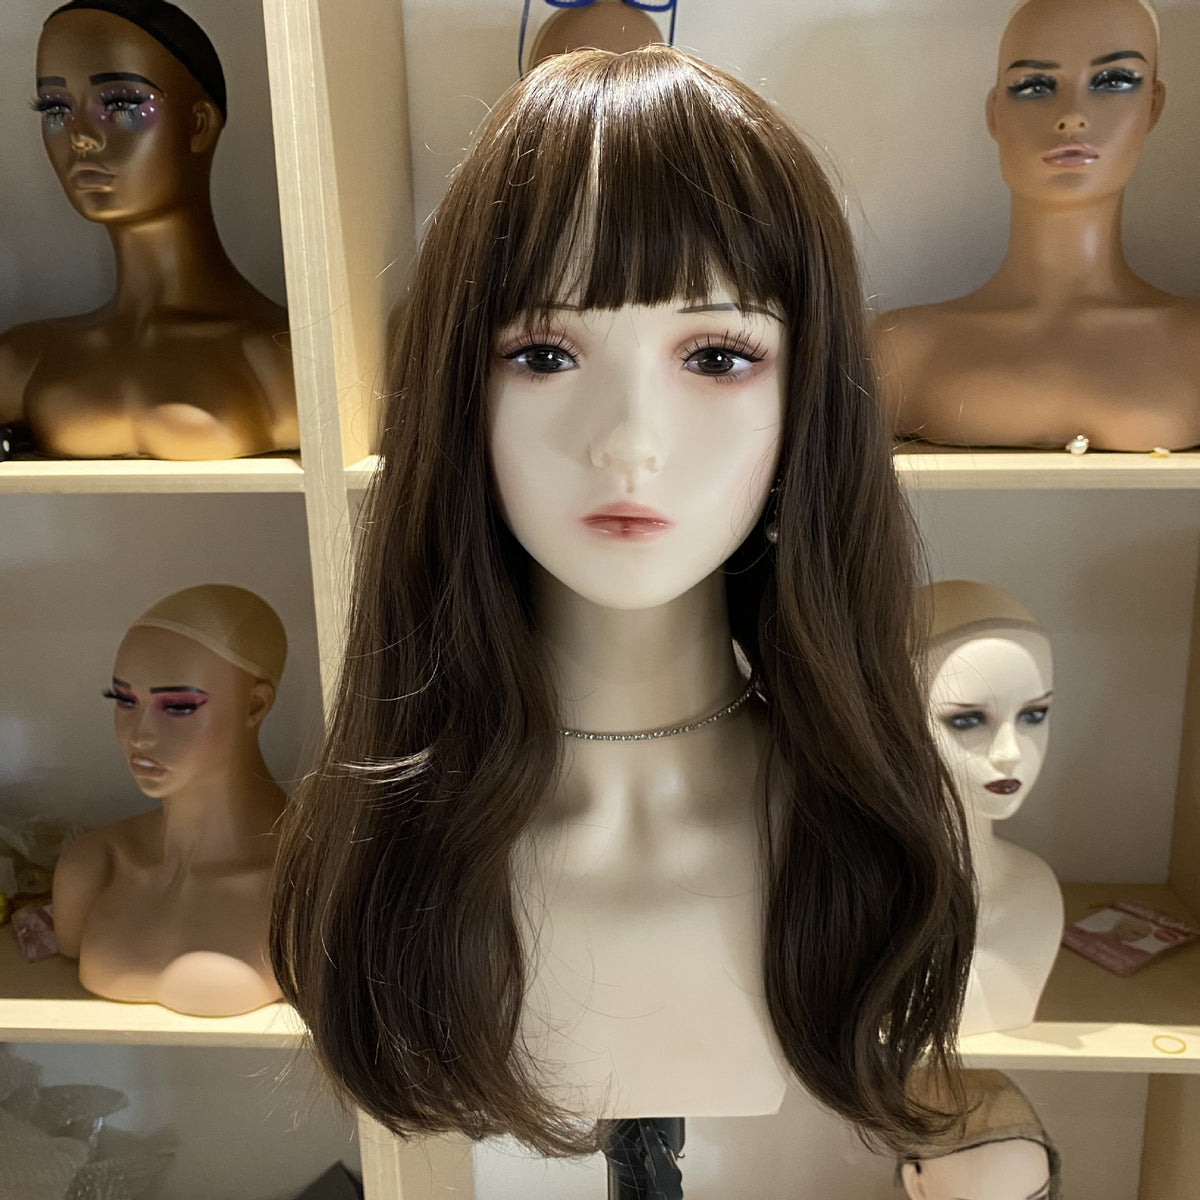 Female Cosplay Anime Doll Wig Head for Makeup Practice